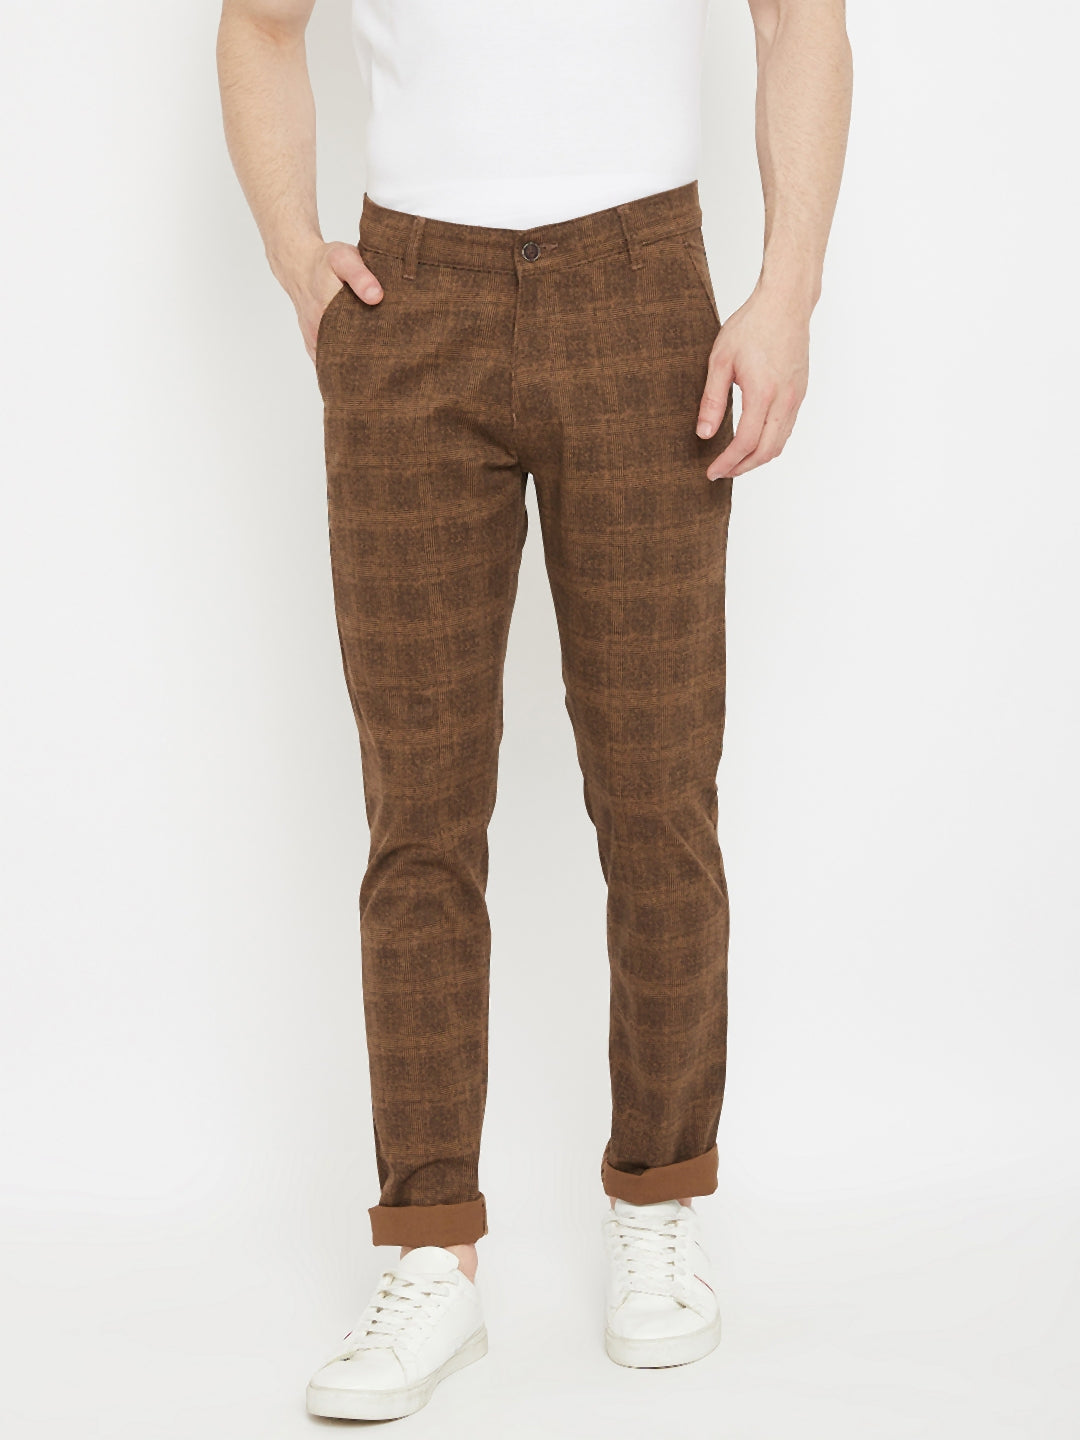 Brown Checked Slim Fit Trousers - Men Trousers